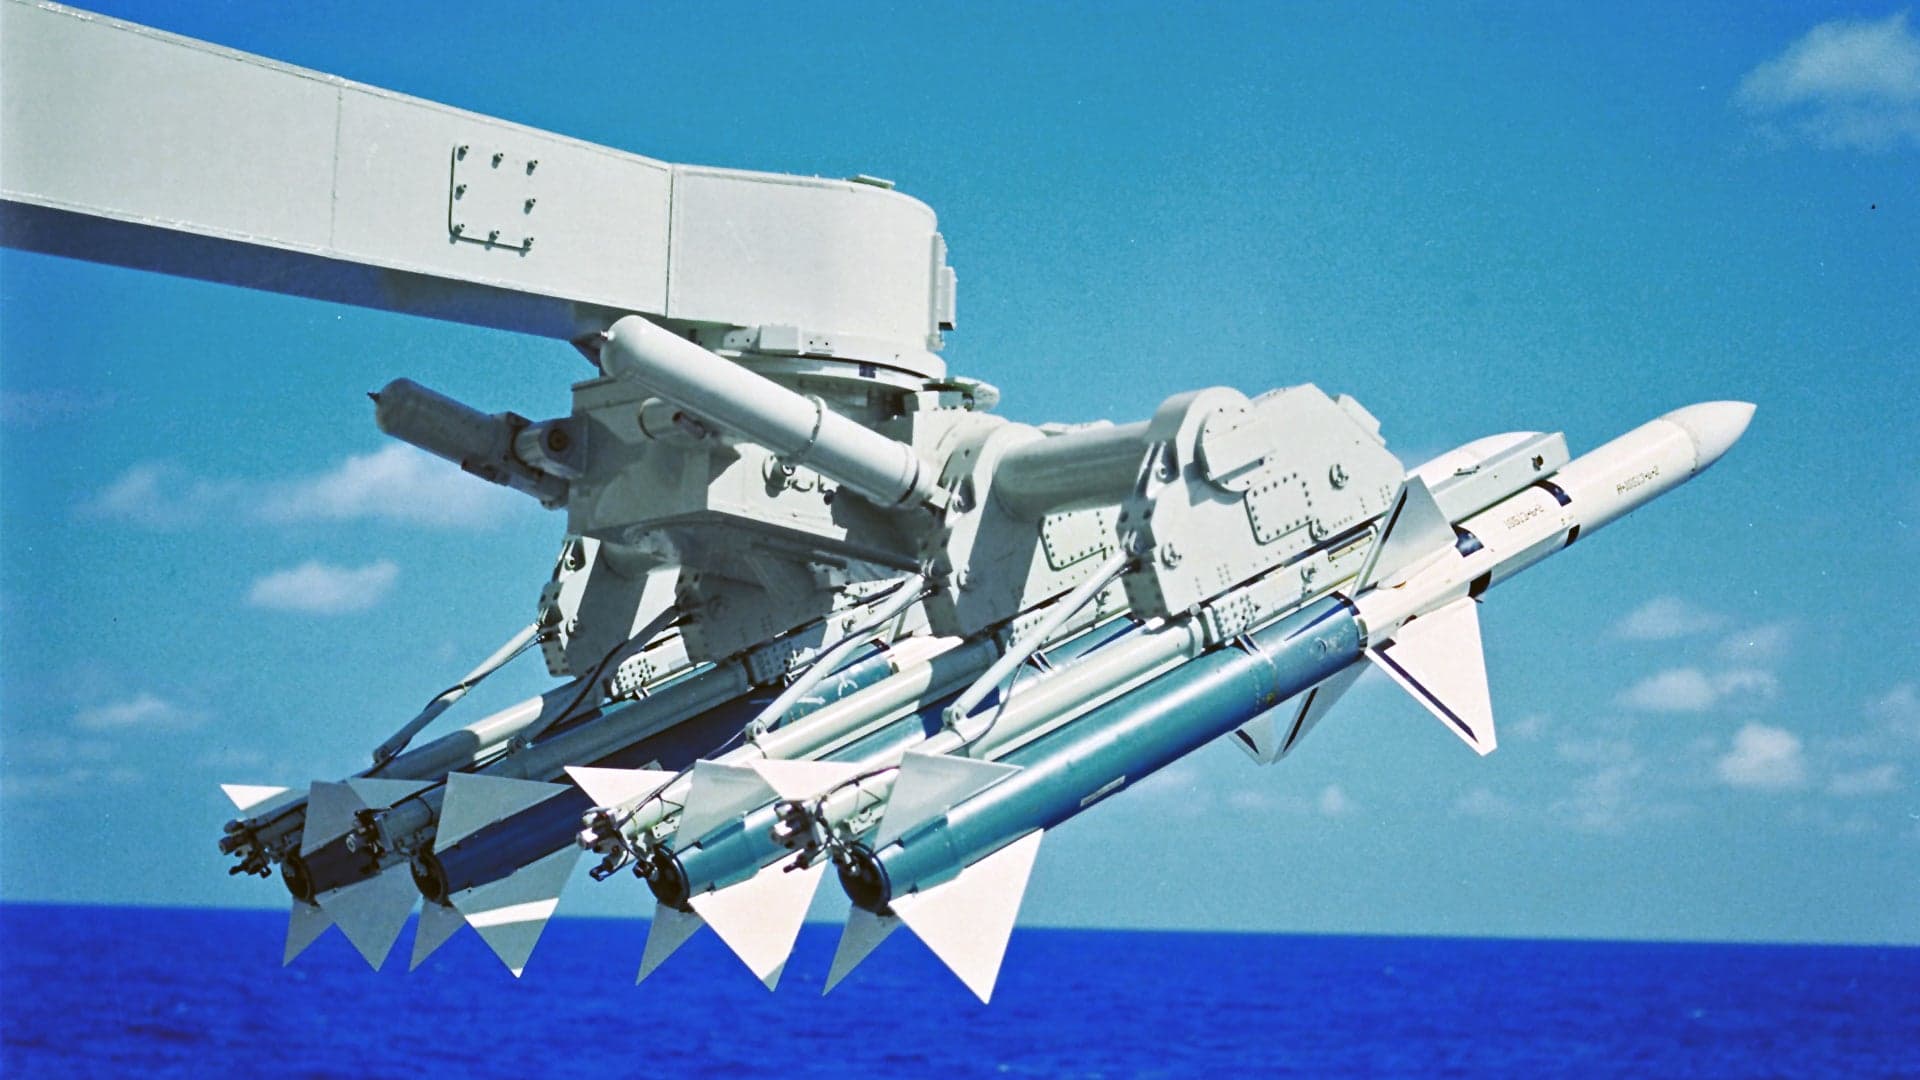 Canadian Destroyers Had These Totally Wacky Sea Sparrow Missile Launcher Systems